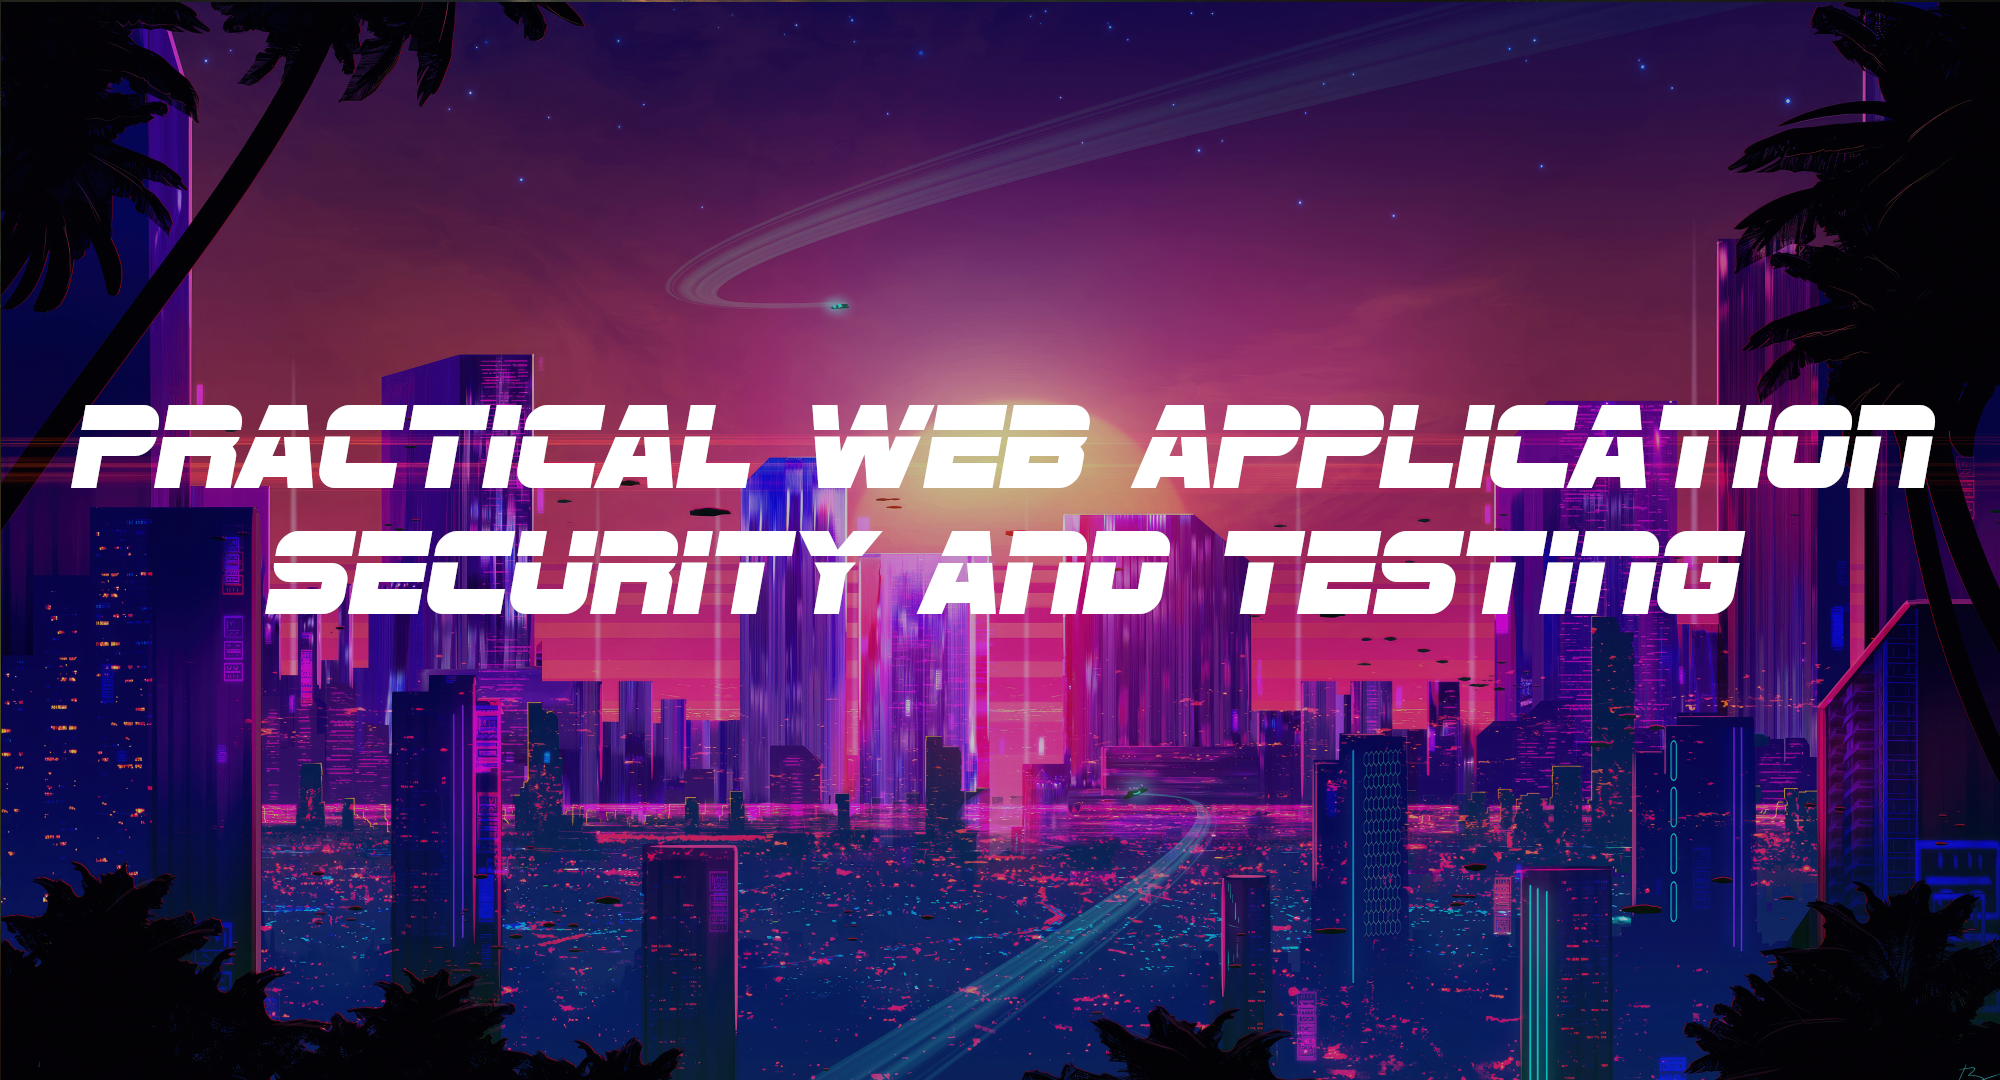 Pink and blue synthwave City with italic font: Practical Web Application Security and Testing. Art by Josef Bartoň.